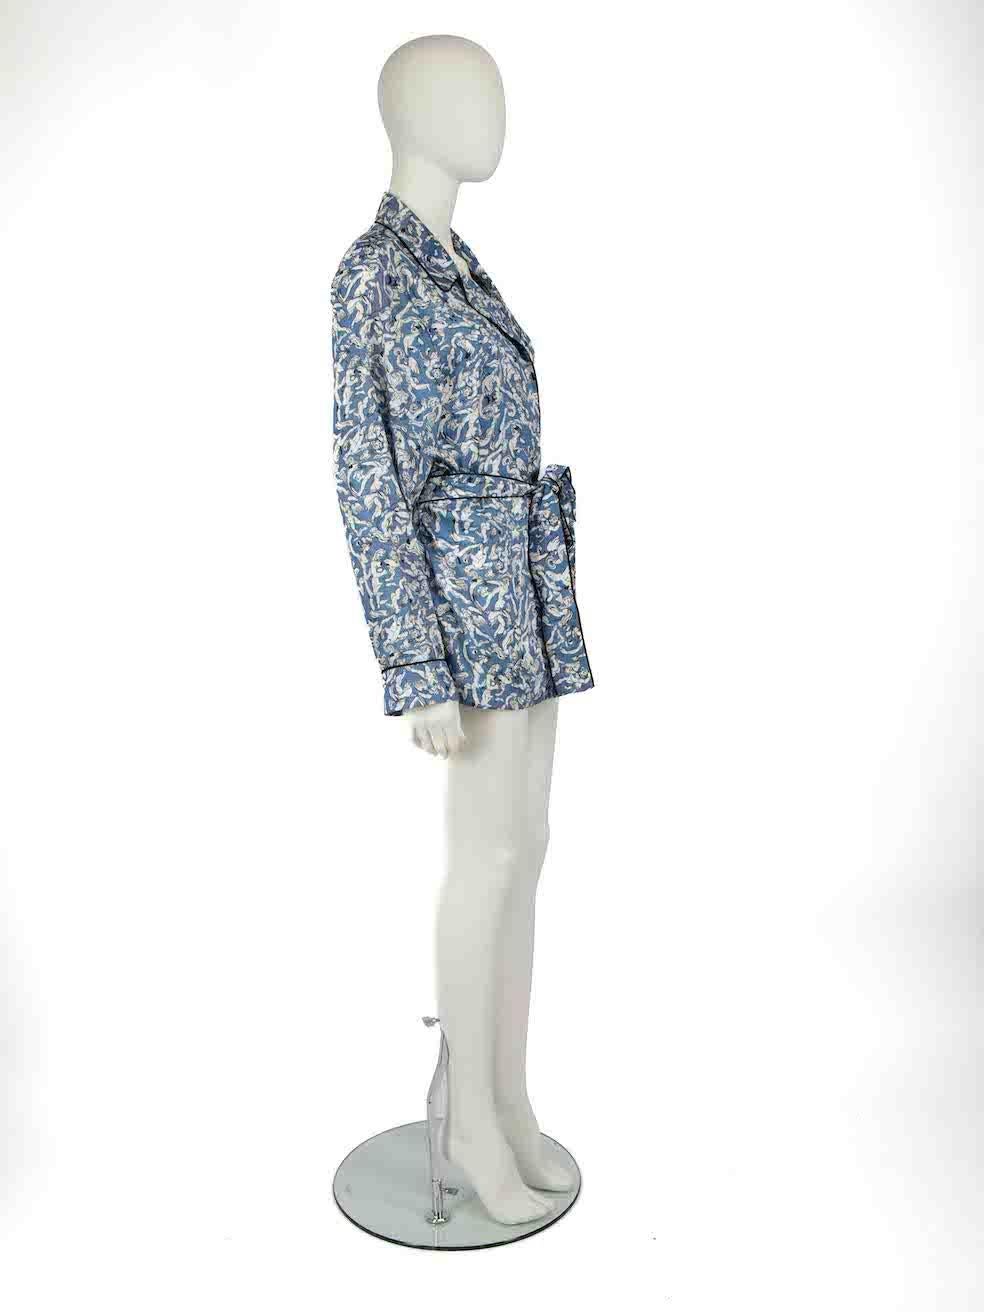 CONDITION is Very good. Minimal wear to shirt is evident. Minimal wear to right sleeve with discolouration on this used Victoria Victoria Beckham designer resale item.
 
 Details
 Blue
 Polyester
 Long sleeves shirt
 Graphic printed pattern
 Tie